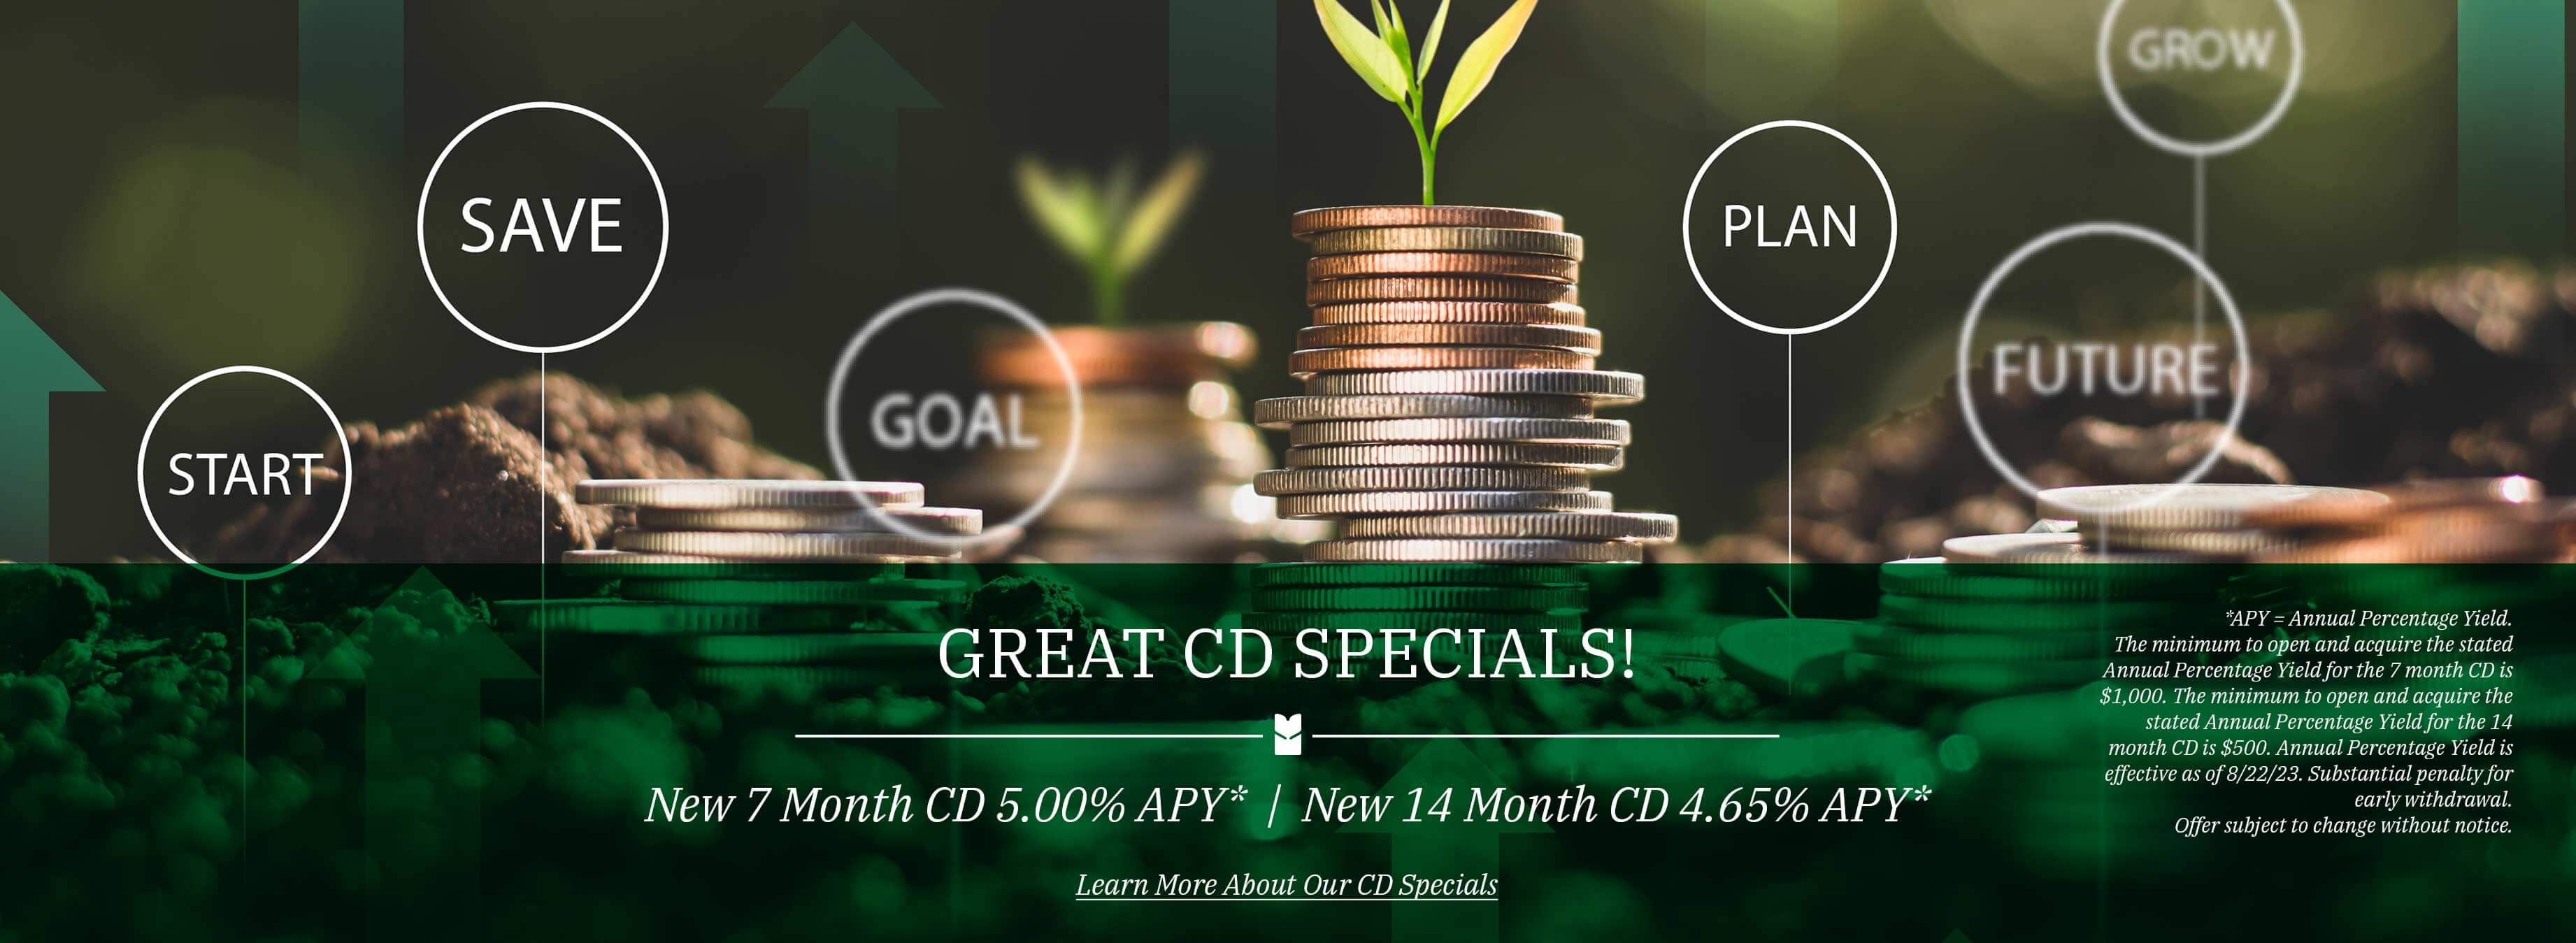 Great CD Specials! New 7 Month CD 5.00% APY. New 14 Month CD 4.65% APY. Learn more about our CD specials. *APY = Annual Percentage Yield. The minimum to open and acquire the stated Annual Percentage Yield for the 7 month CD is $1,000. The minimum to open and acquire the stated Annual Percentage Yield for the 14 month CD is $500. Annual Percentage Yield is effective as of 8/22/23. Substantial penalty for early withdrawal. Offer subject to change without notice.